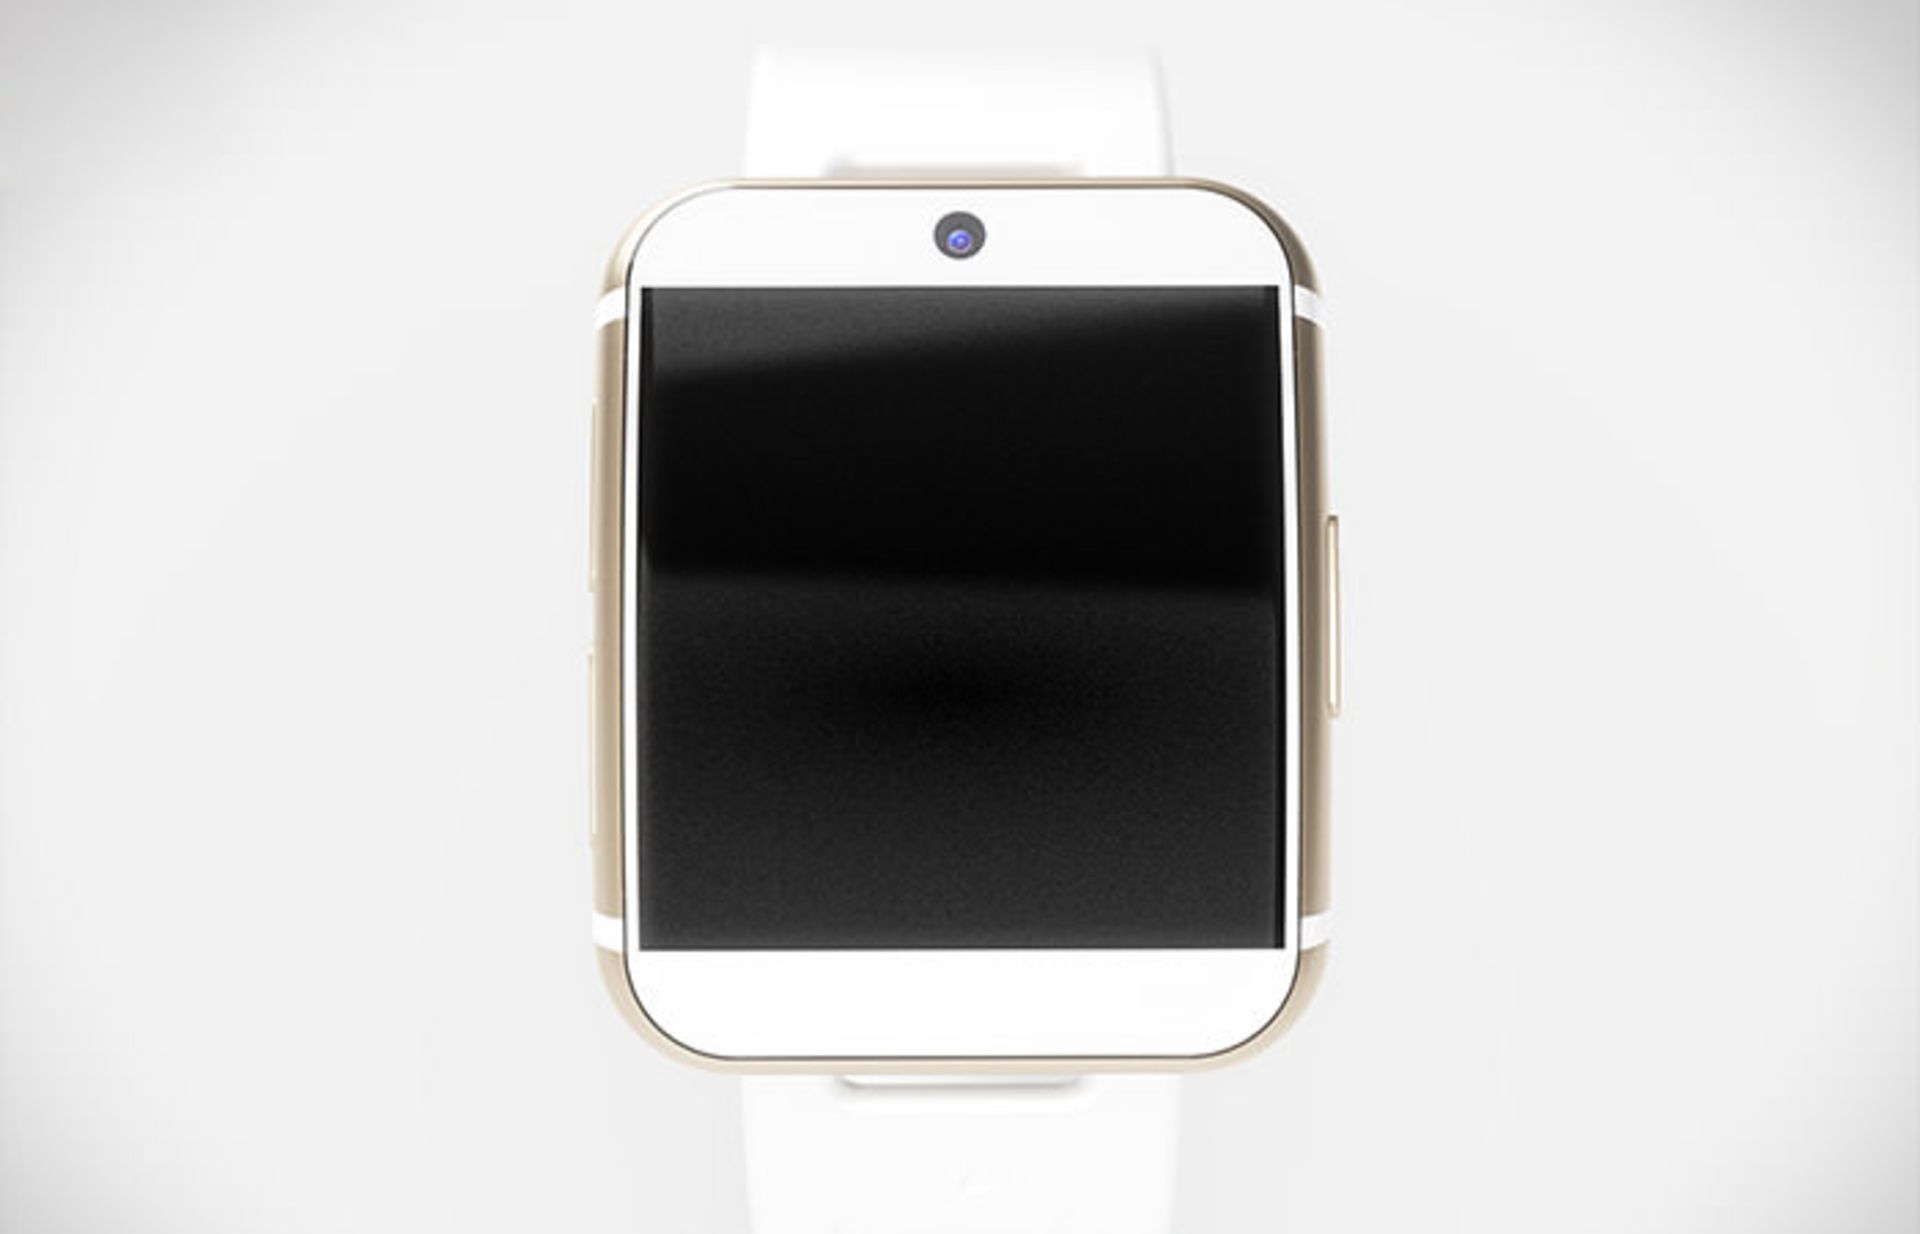 10Apple-iWatch-concept-shows-dreamy-curves-iPhone-esque-looks